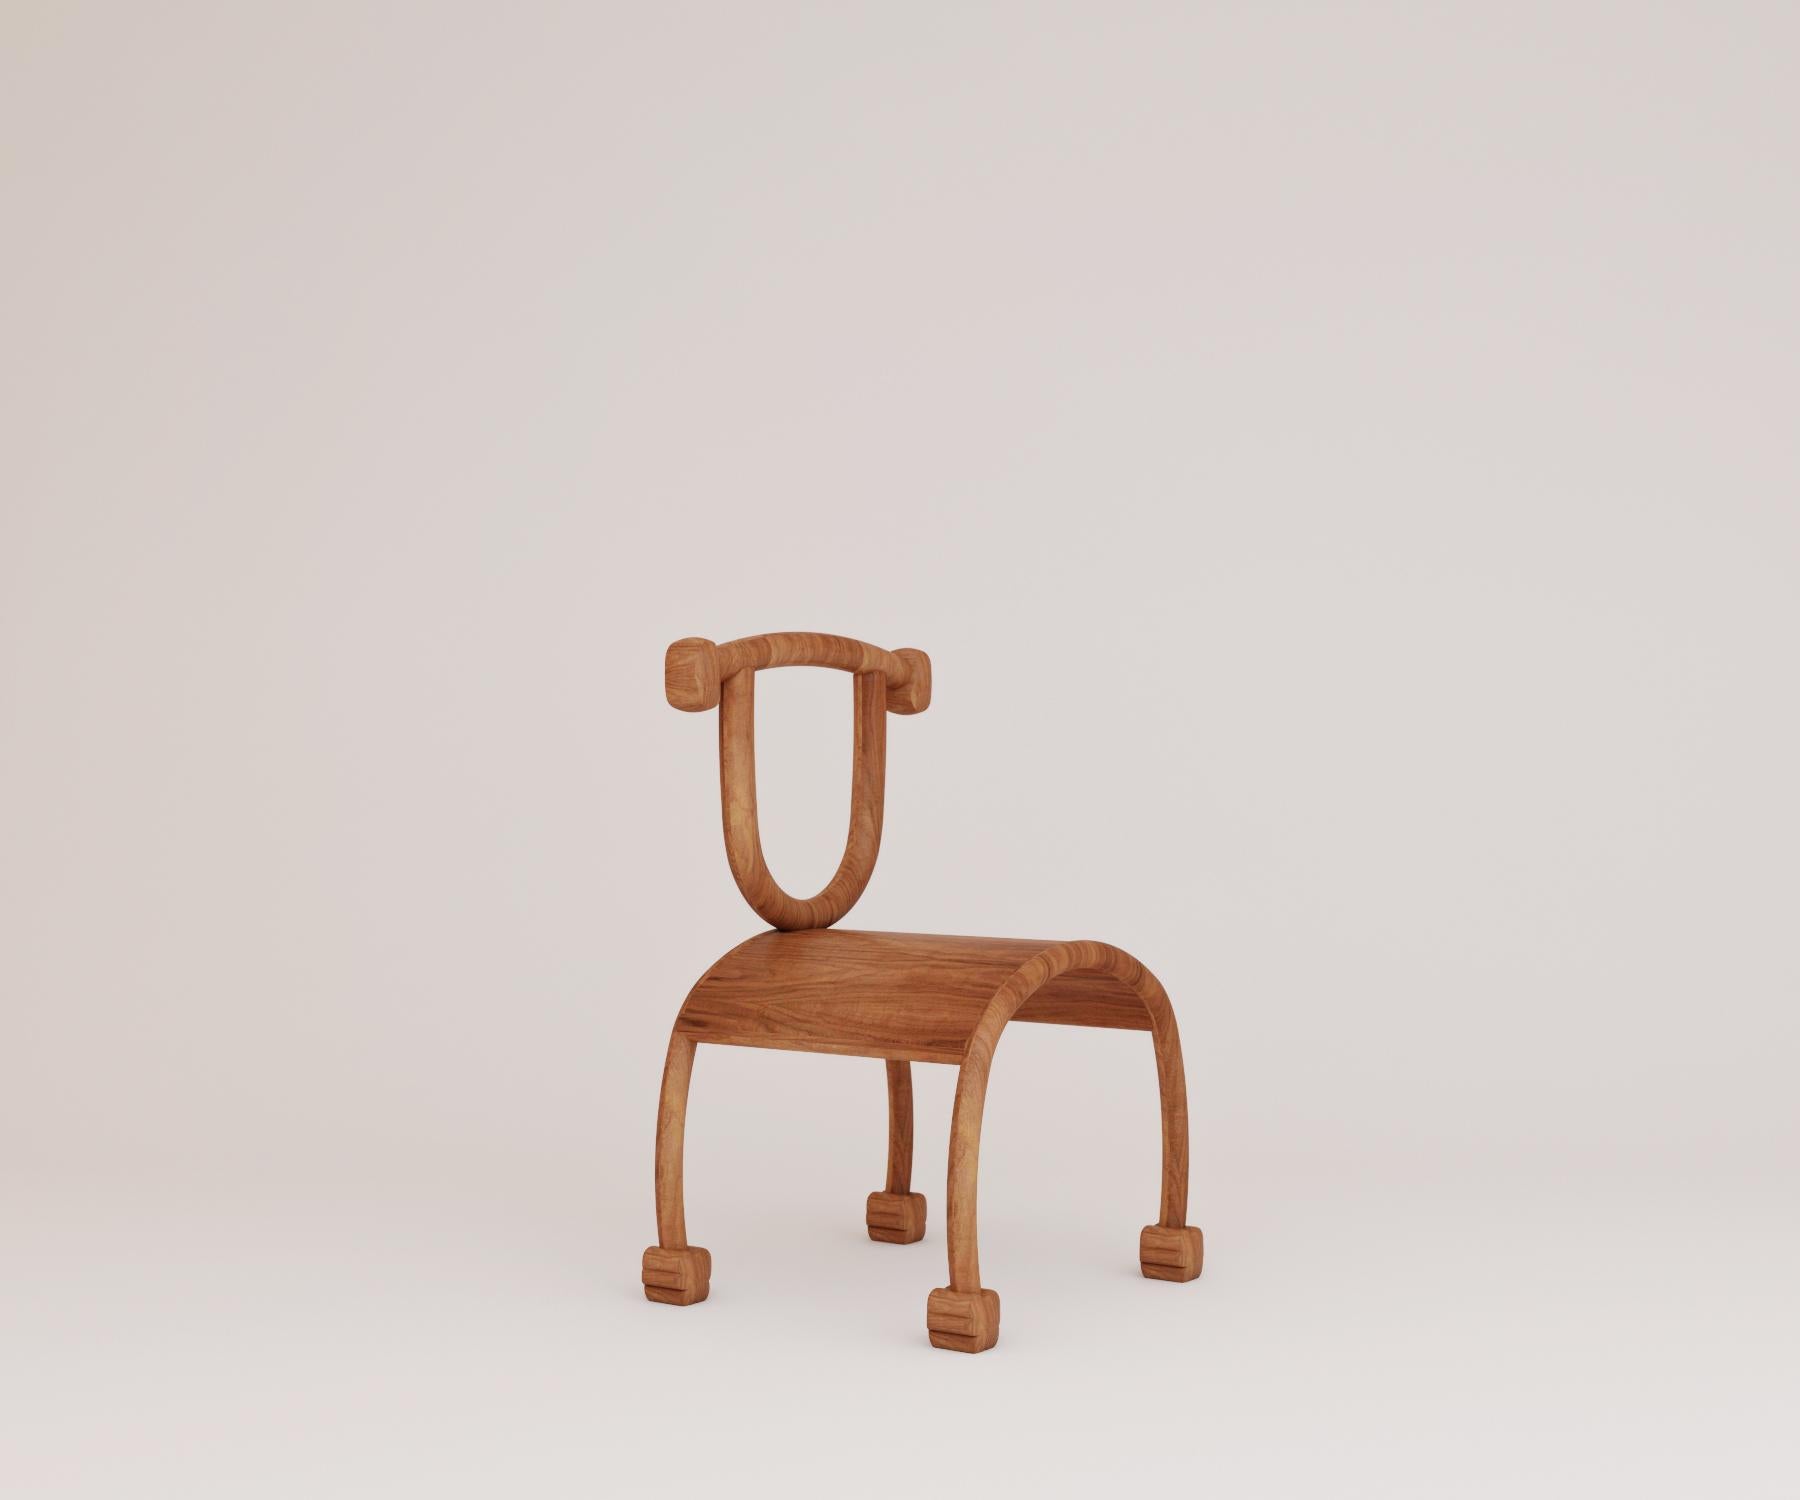 Hand-Crafted Contemporary Wooden Smile Chair by Rejo Studio For Sale